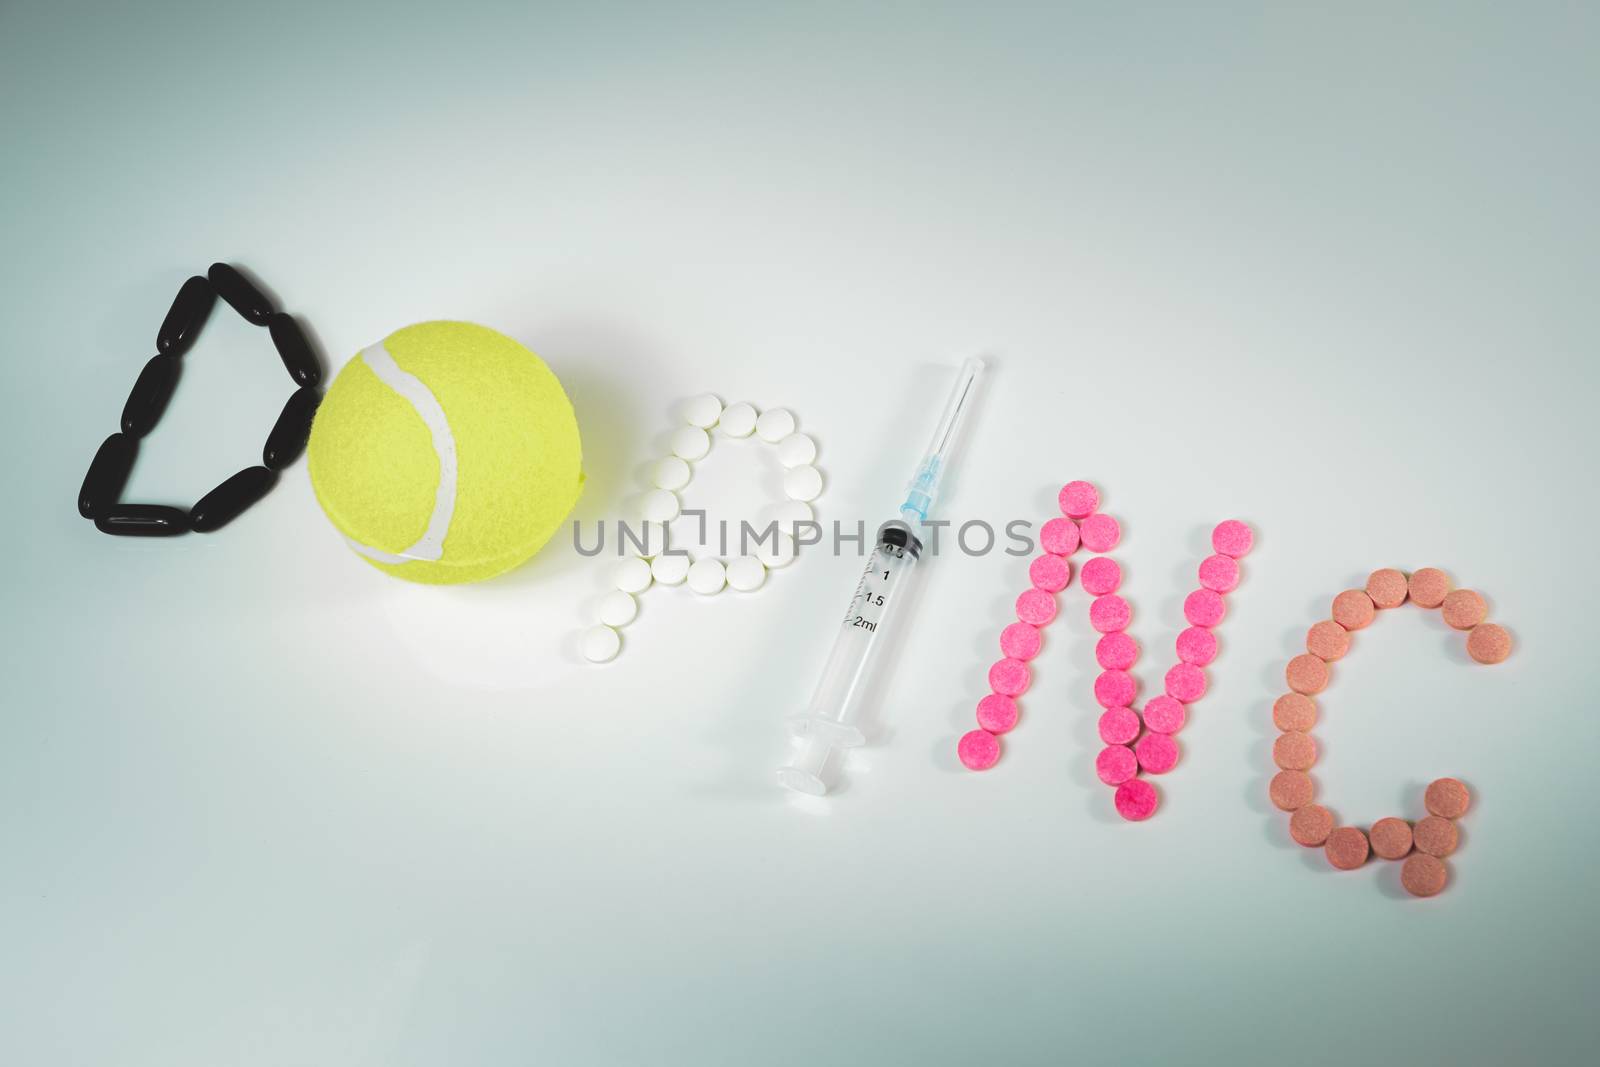 "Doping" word made of pills, tablets, syringe and a tennis ball. by photoboyko